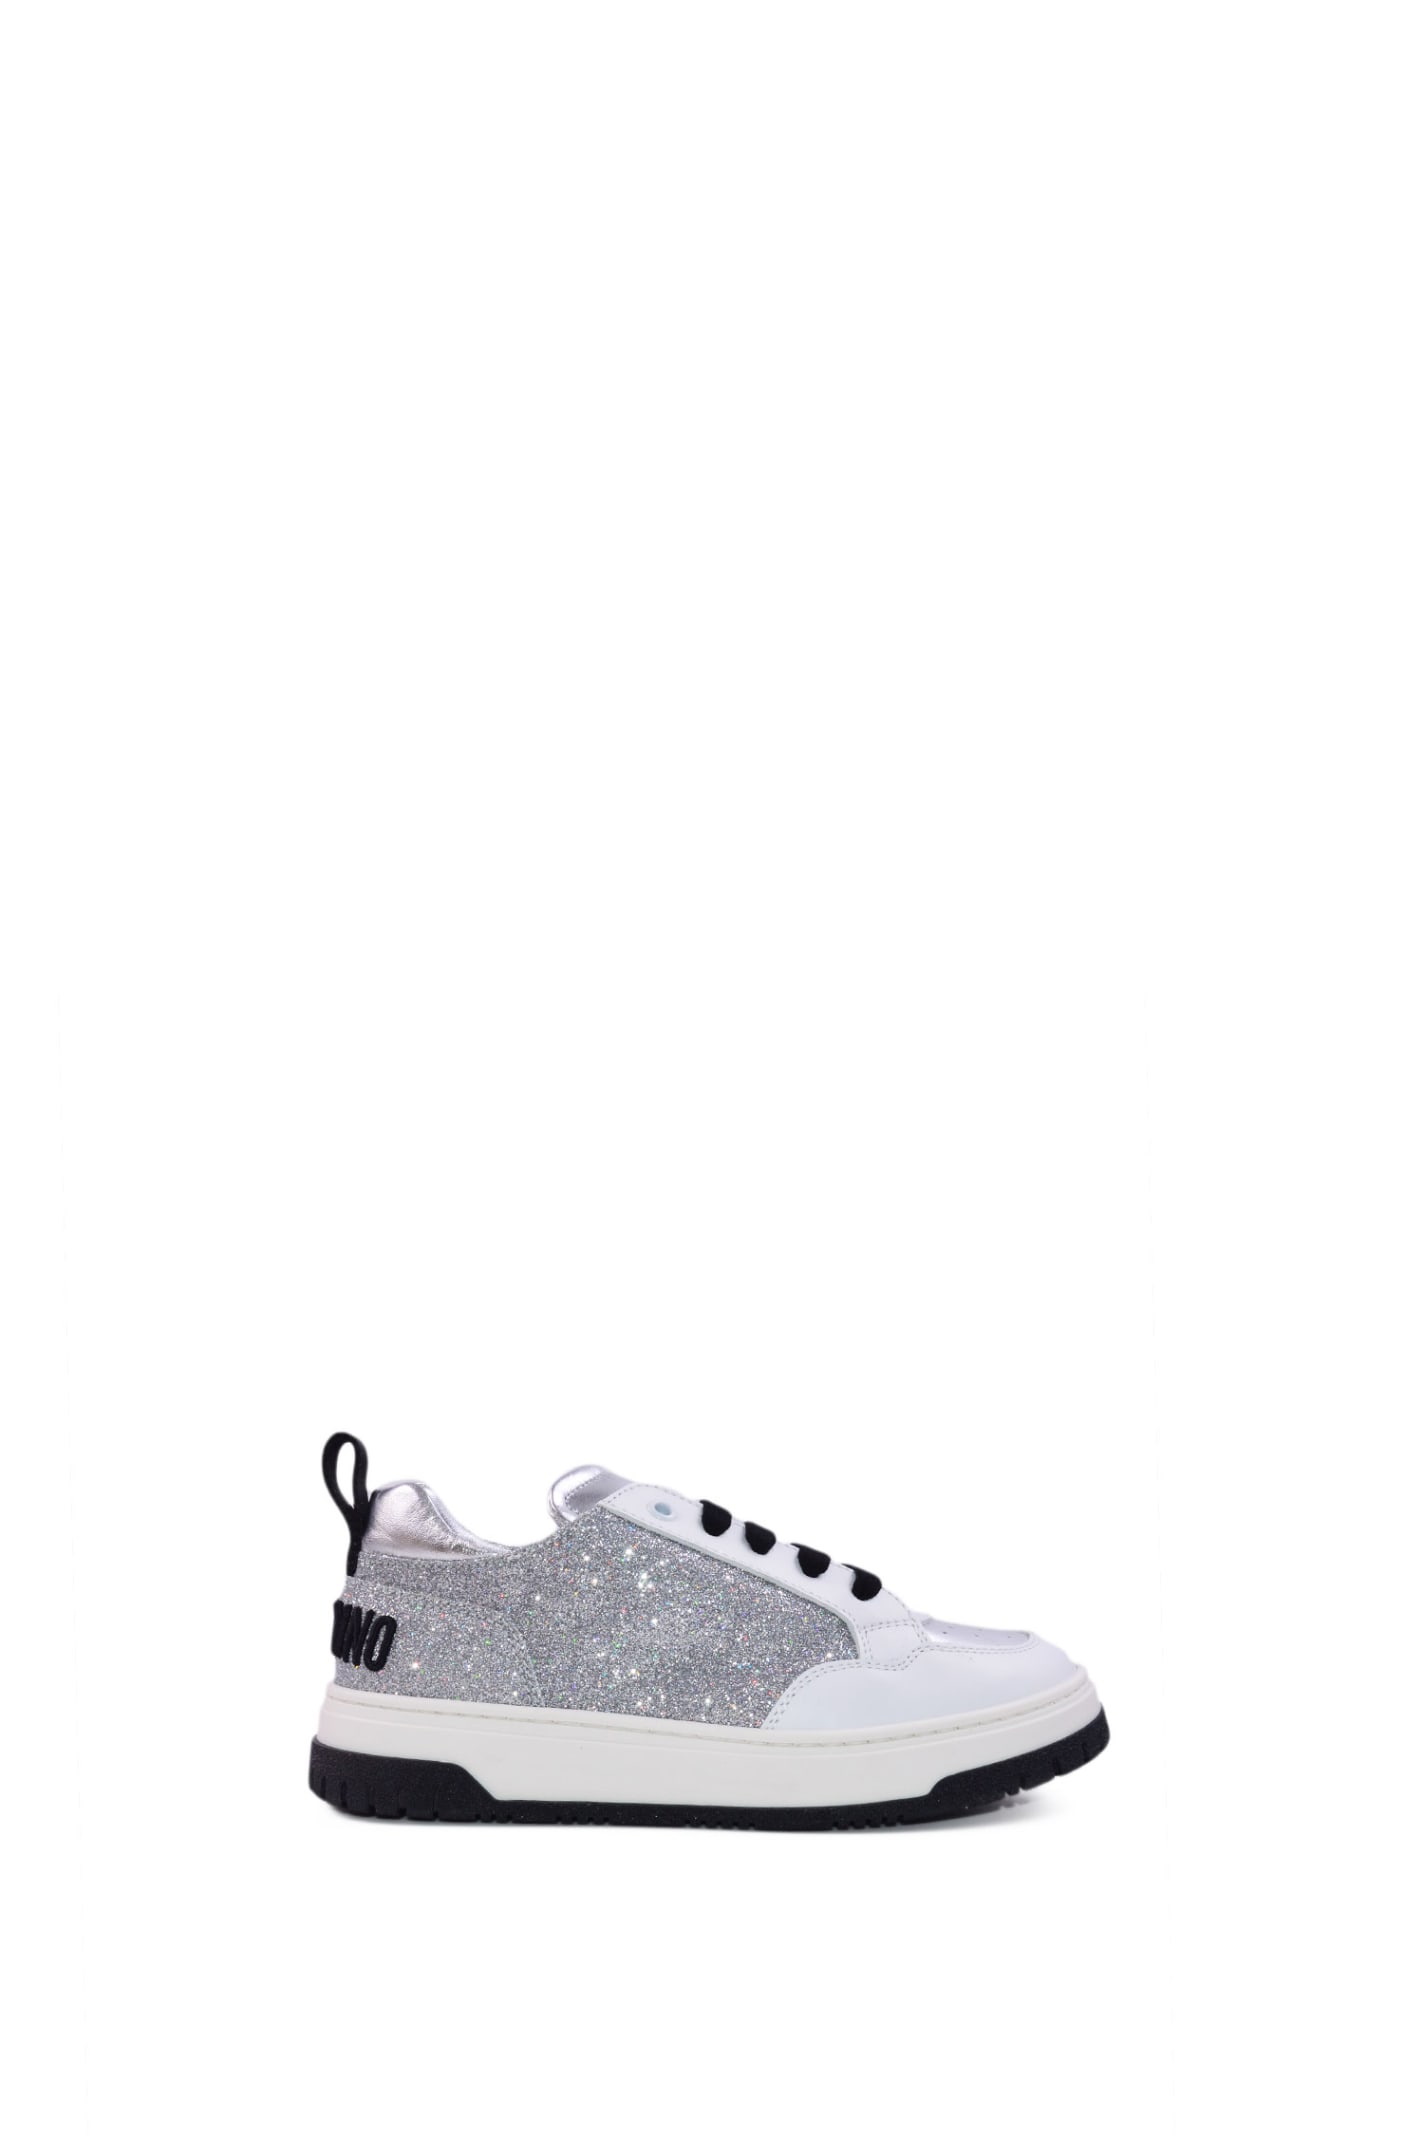 MOSCHINO SNEAKERS WITH GLITTER